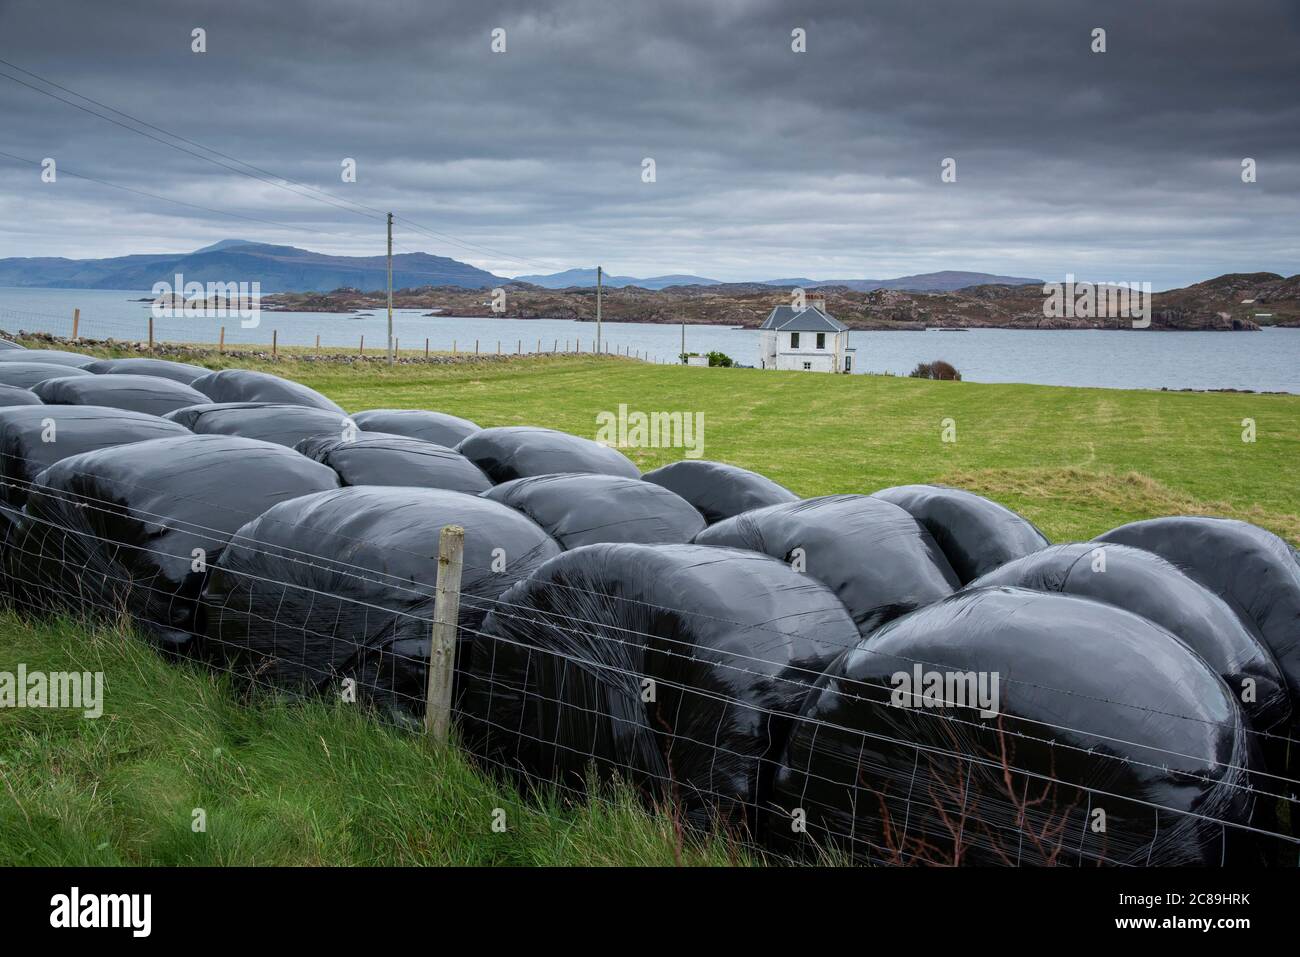 Silage bales on Iona, Inner Hebrides off the Ross of Mull, Argyll and Bute, Scotland, United Kingdom. Stock Photo